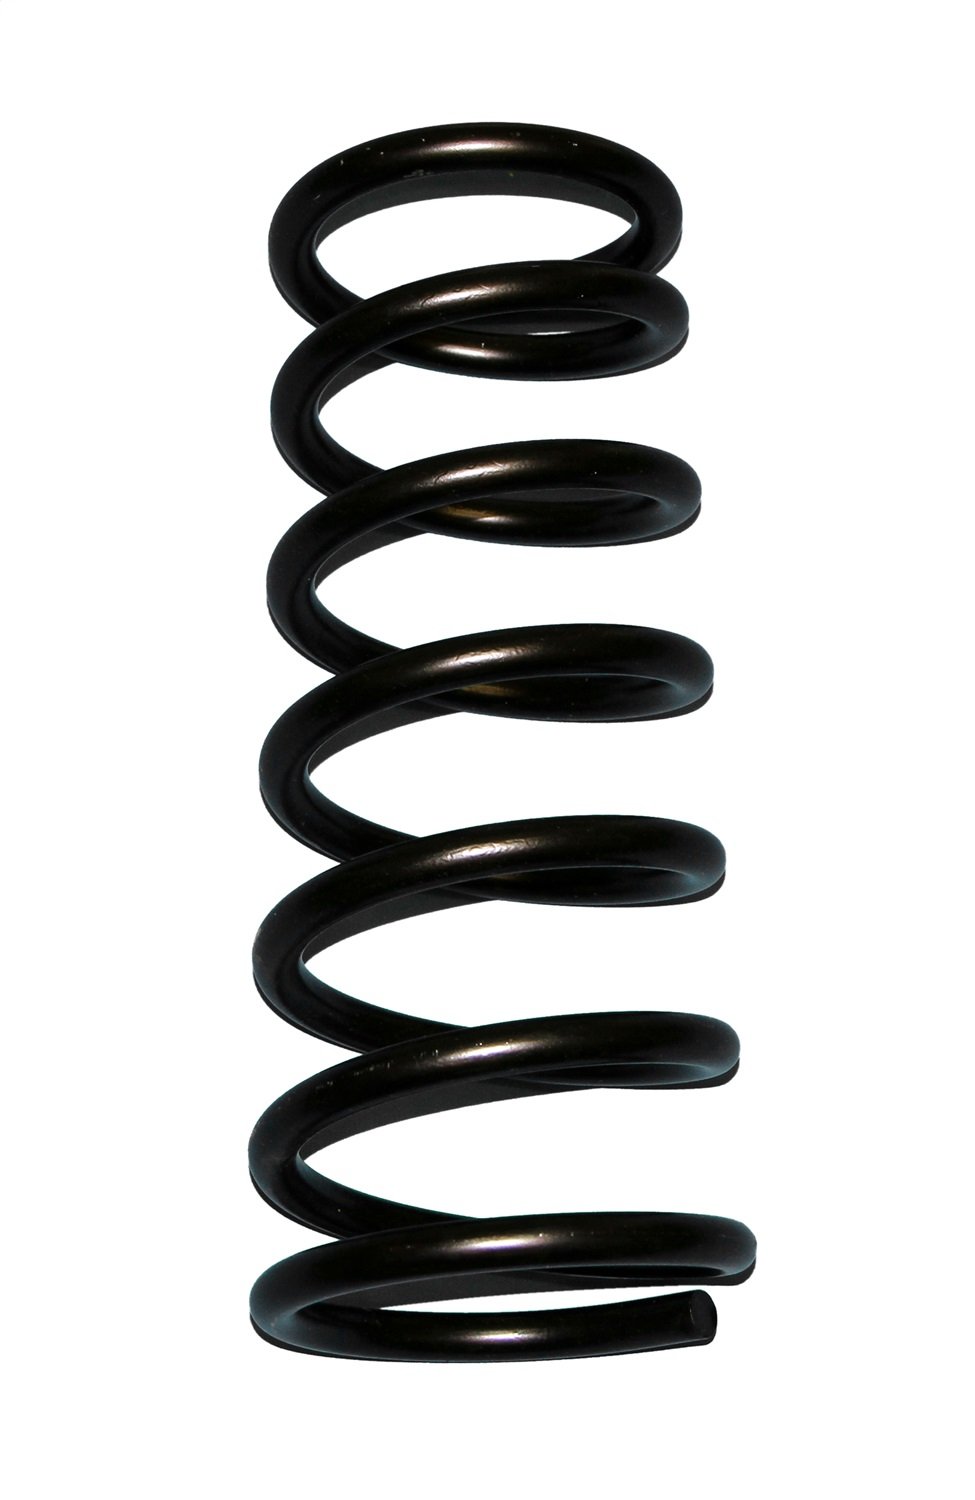 Softride Front Coil Springs 1994-2001 Ram Pickup 1/2-Ton